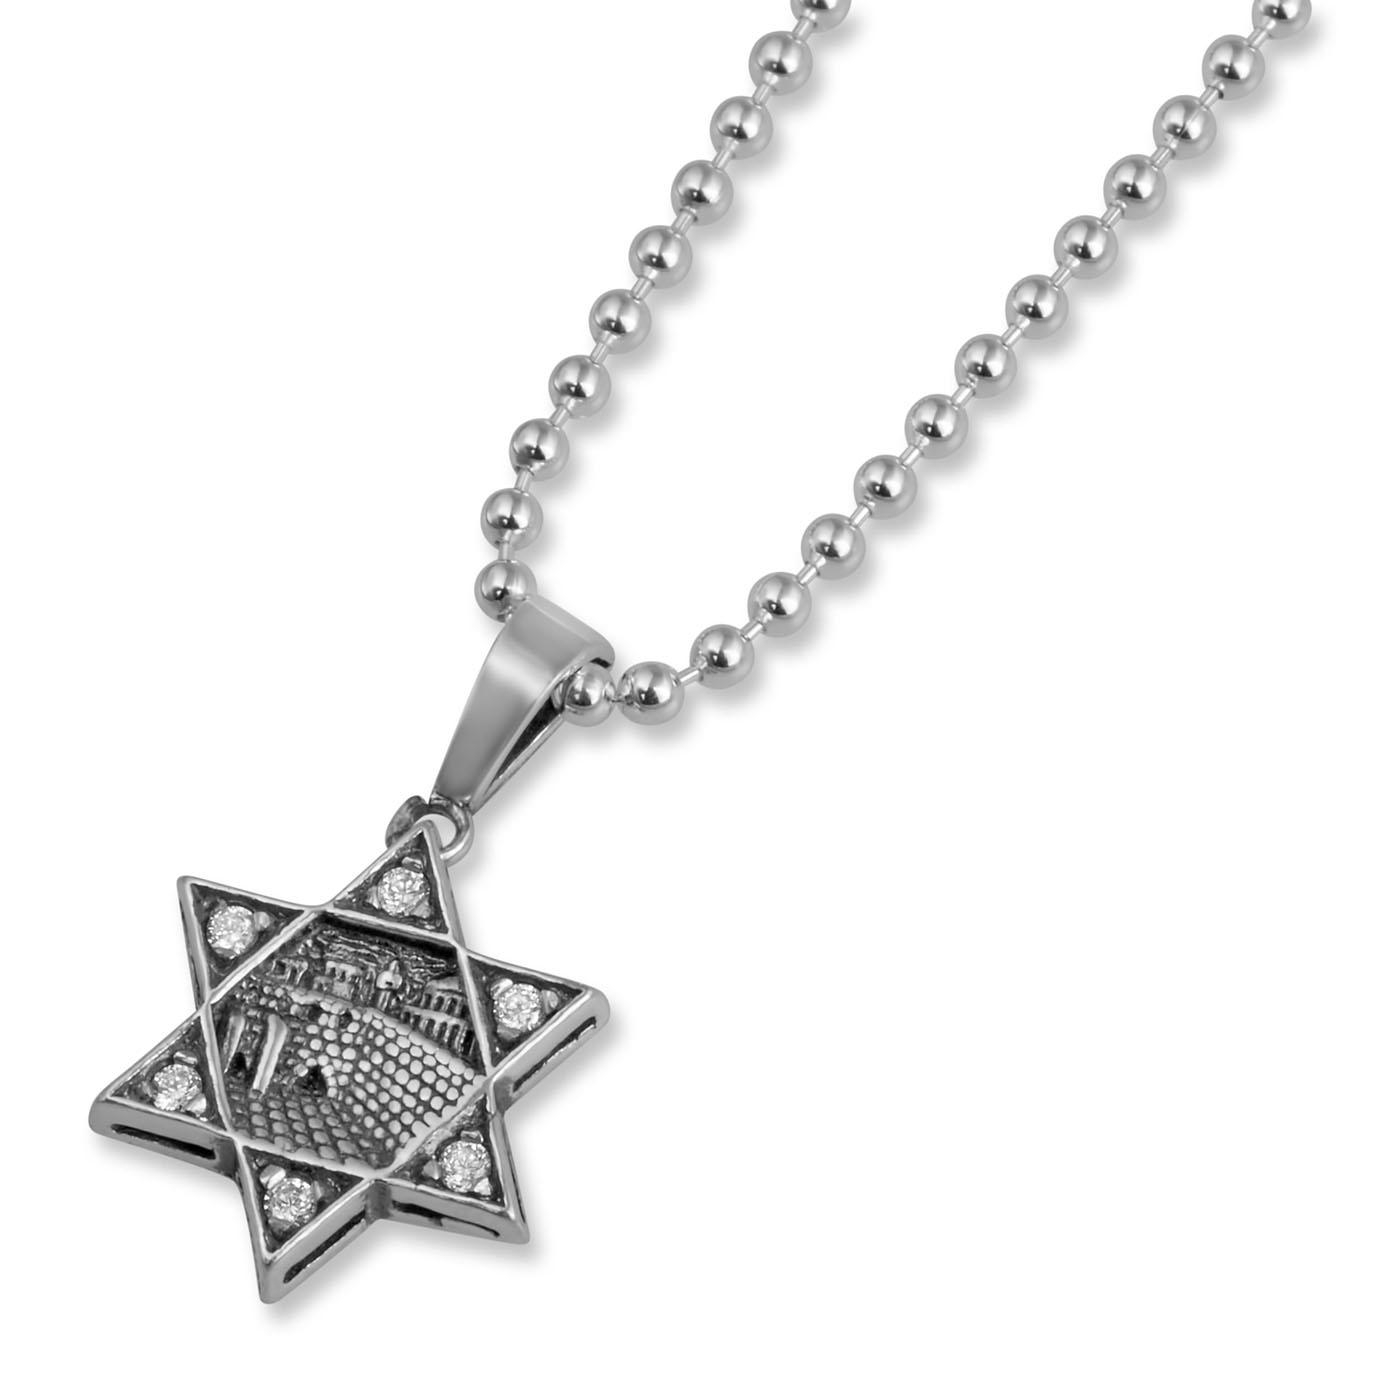 Sterling Silver Star of David Necklace with Western Wall Engraving and Zircon Points - 1